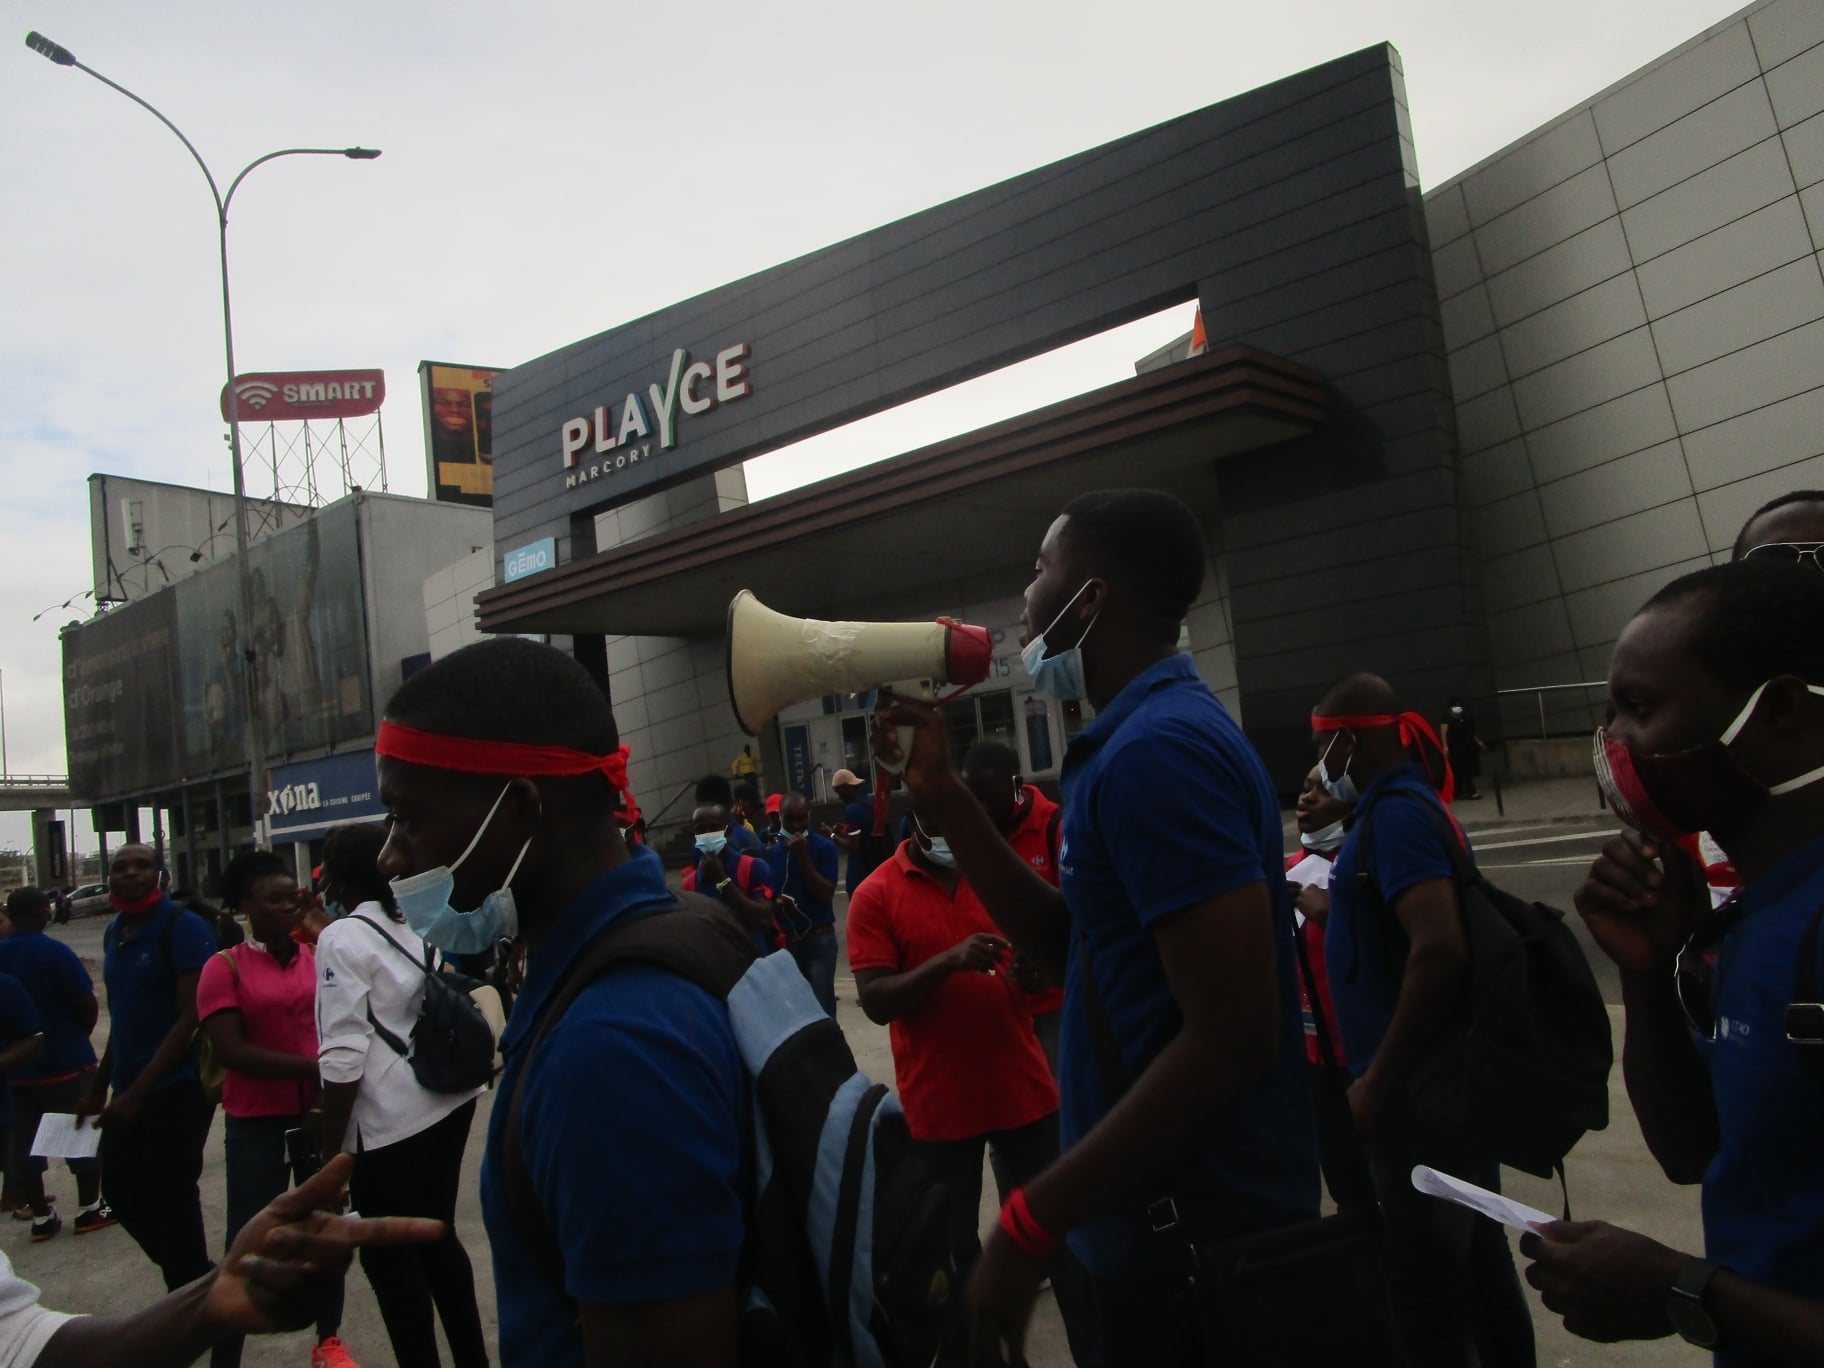 Strike at CFAO-Retail in Côte D’Ivoire — International Solidarity Needed